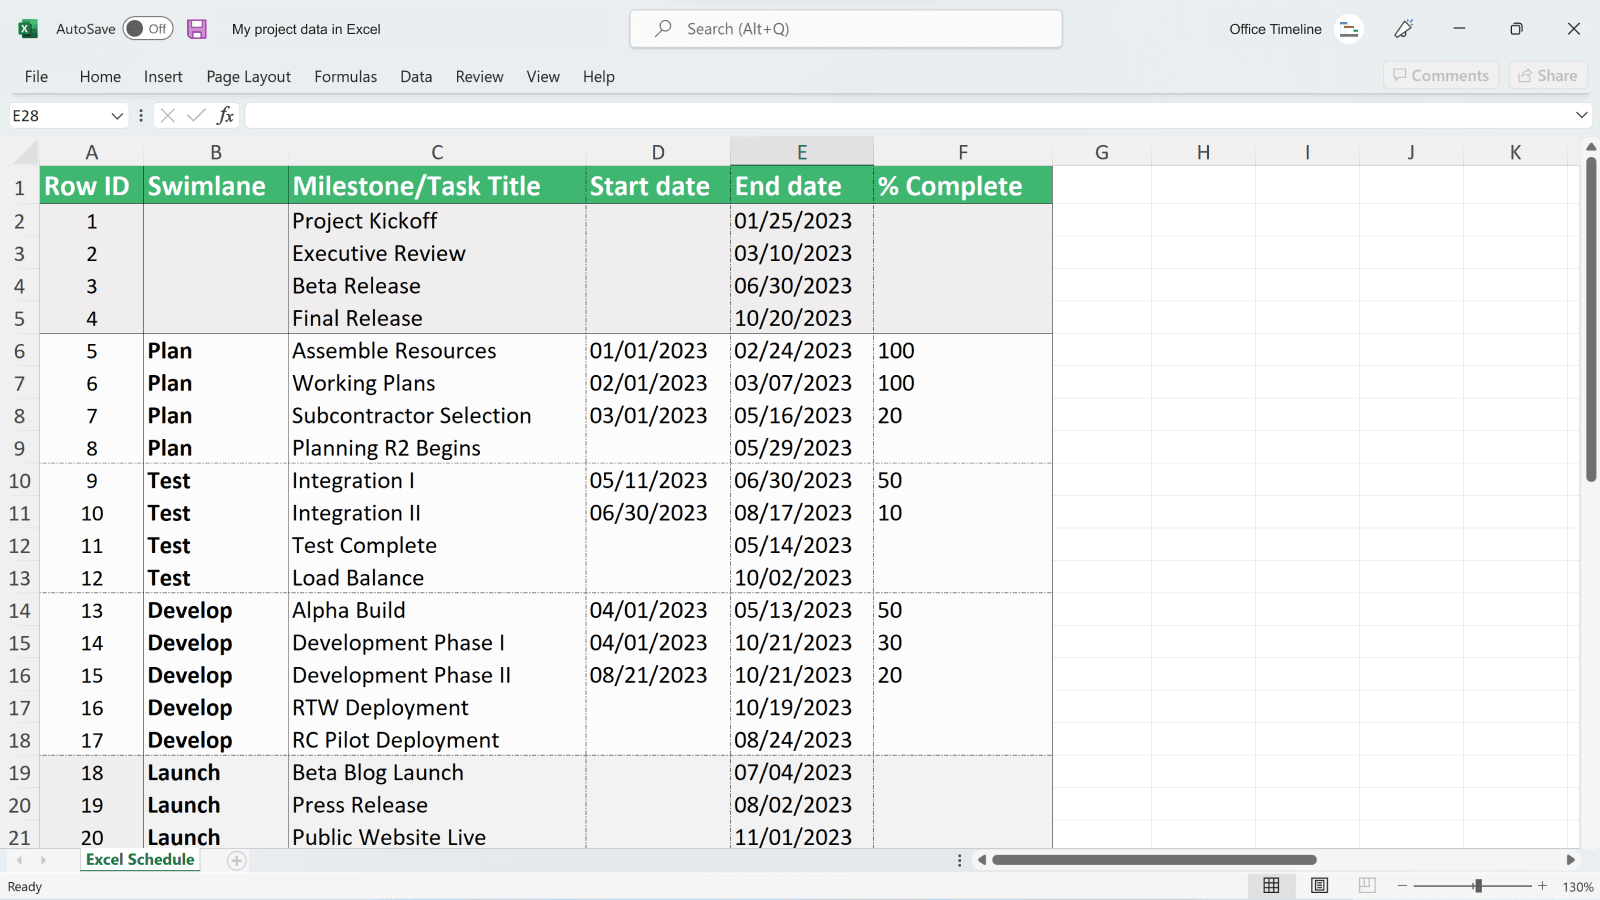 Project data in Excel before importing into Office Timeline Online